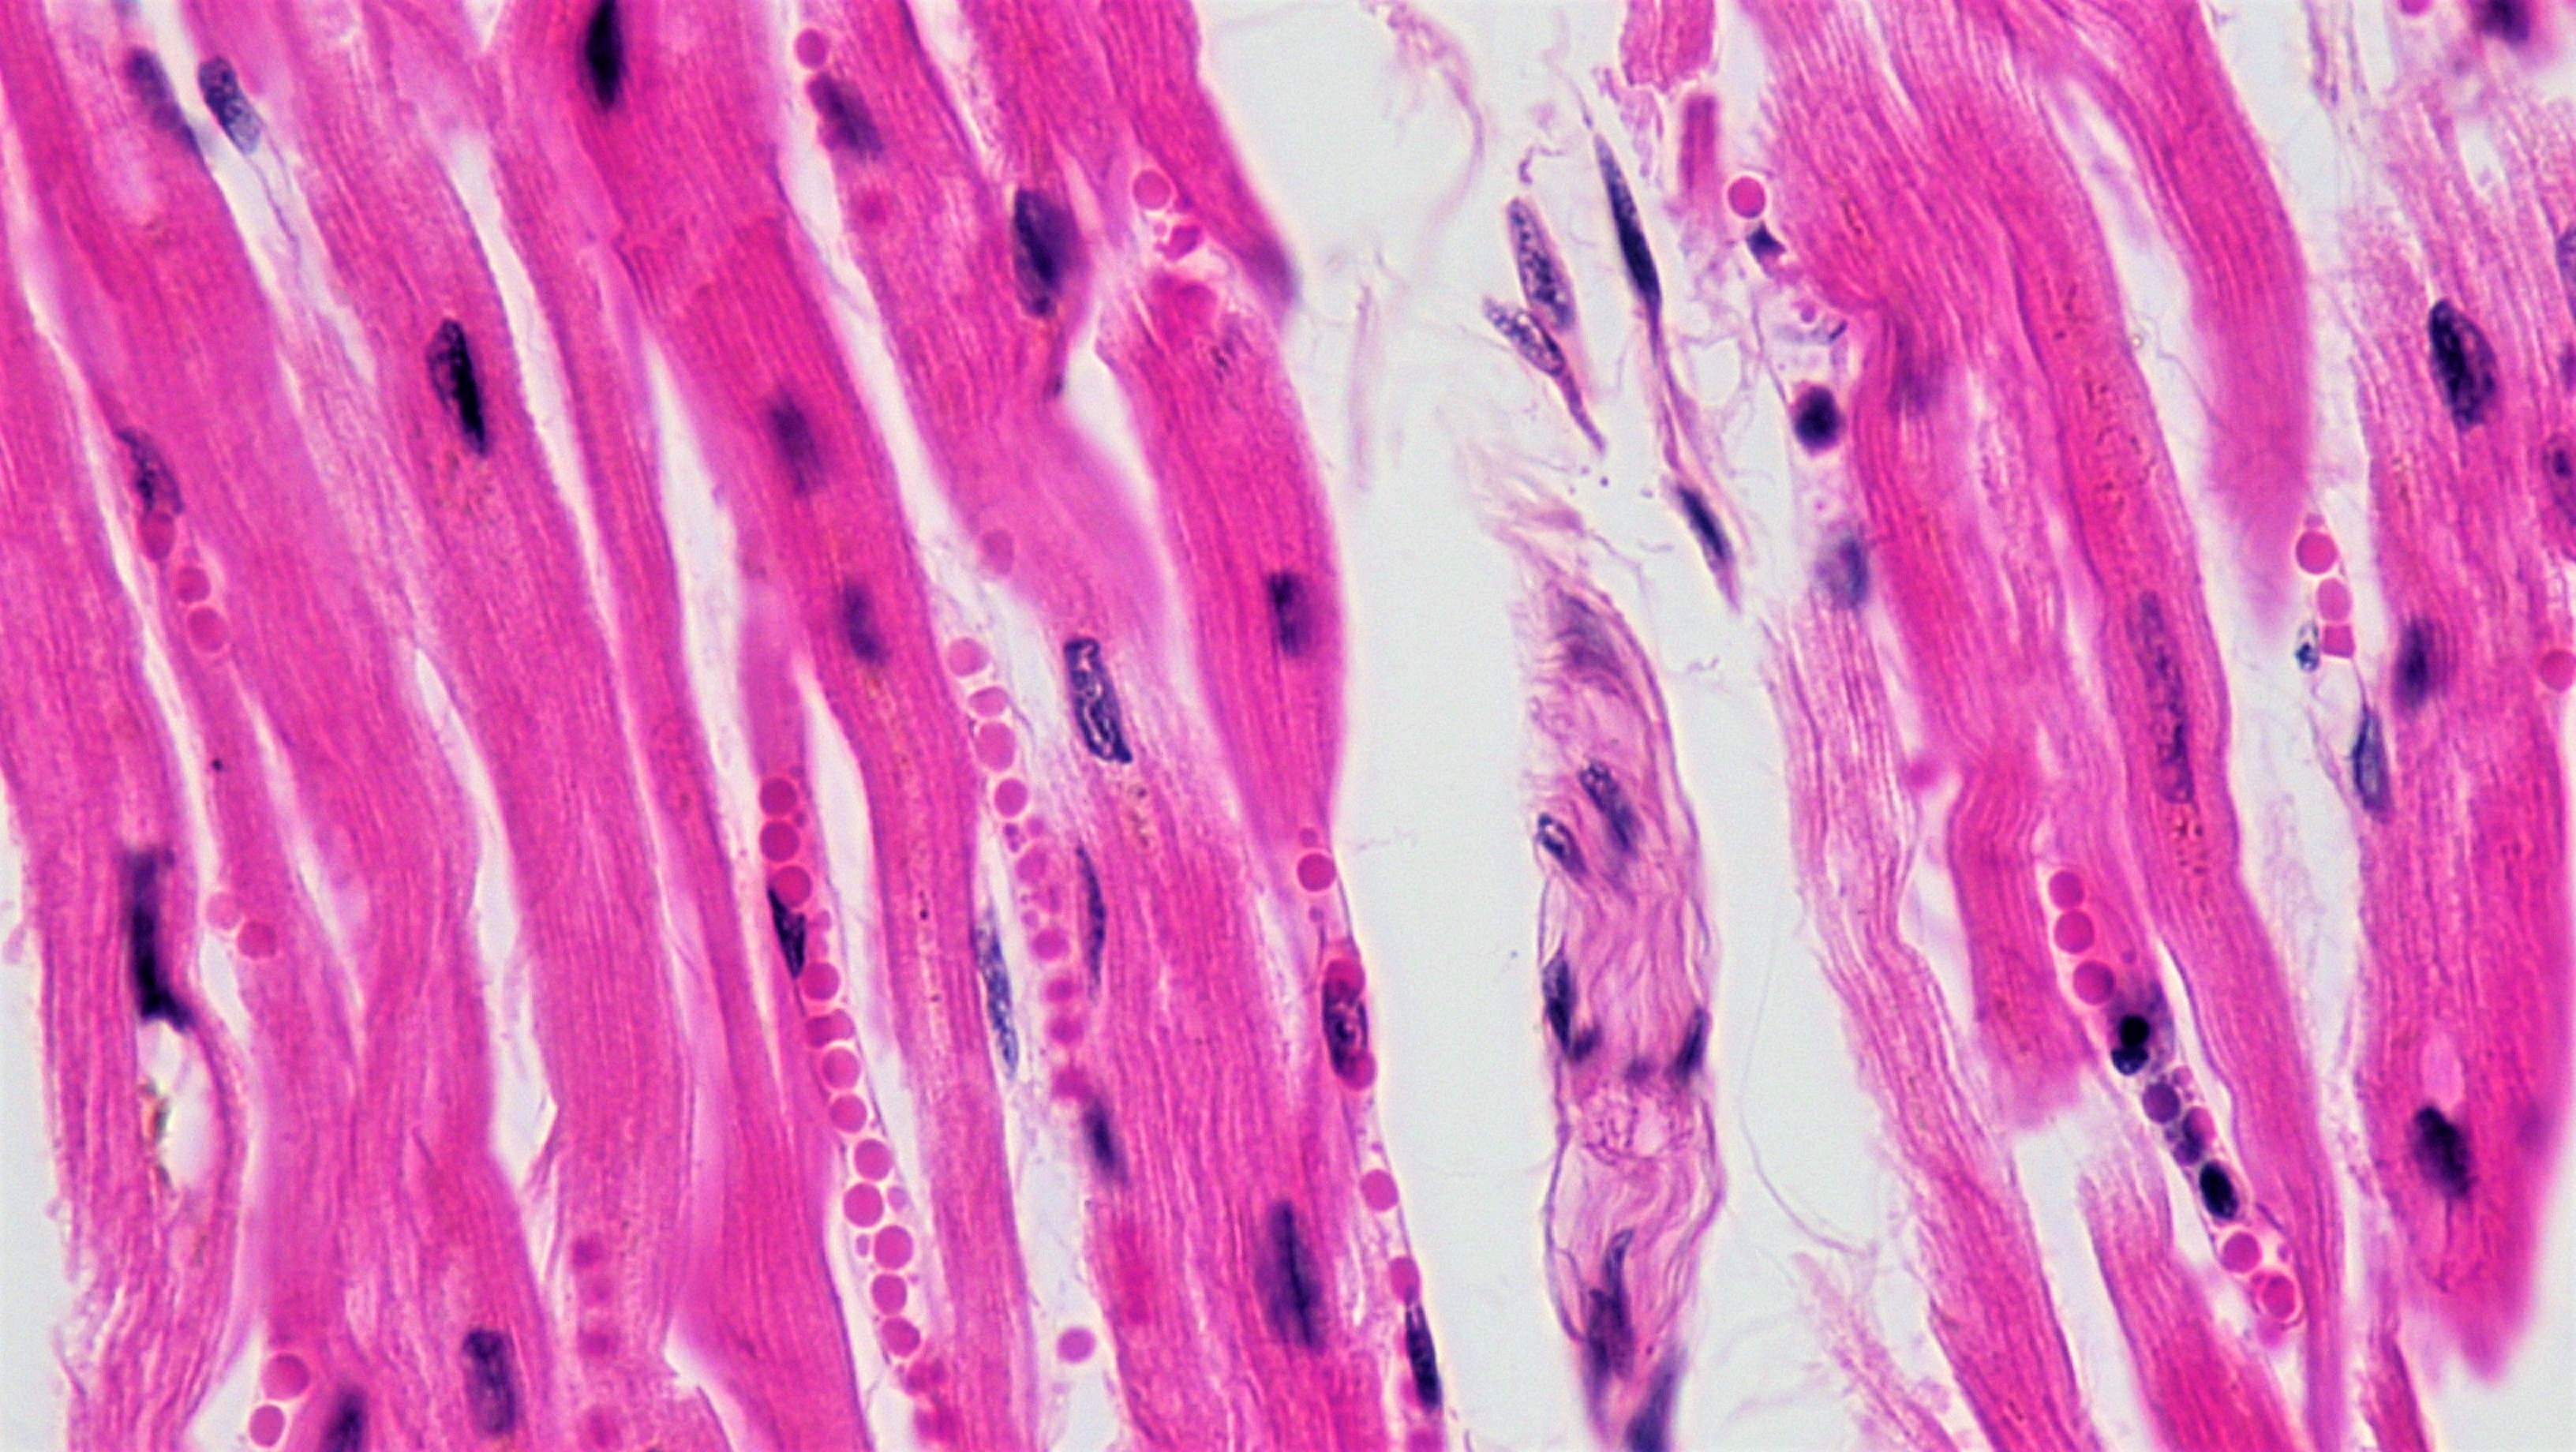 Microscope image of heart muscle cells. It has been stained so that the cytoplasm shows up as pink and the nuclei show up as blue. The cells are long and thin and lined up alongside each other, with gaps between them in some places.